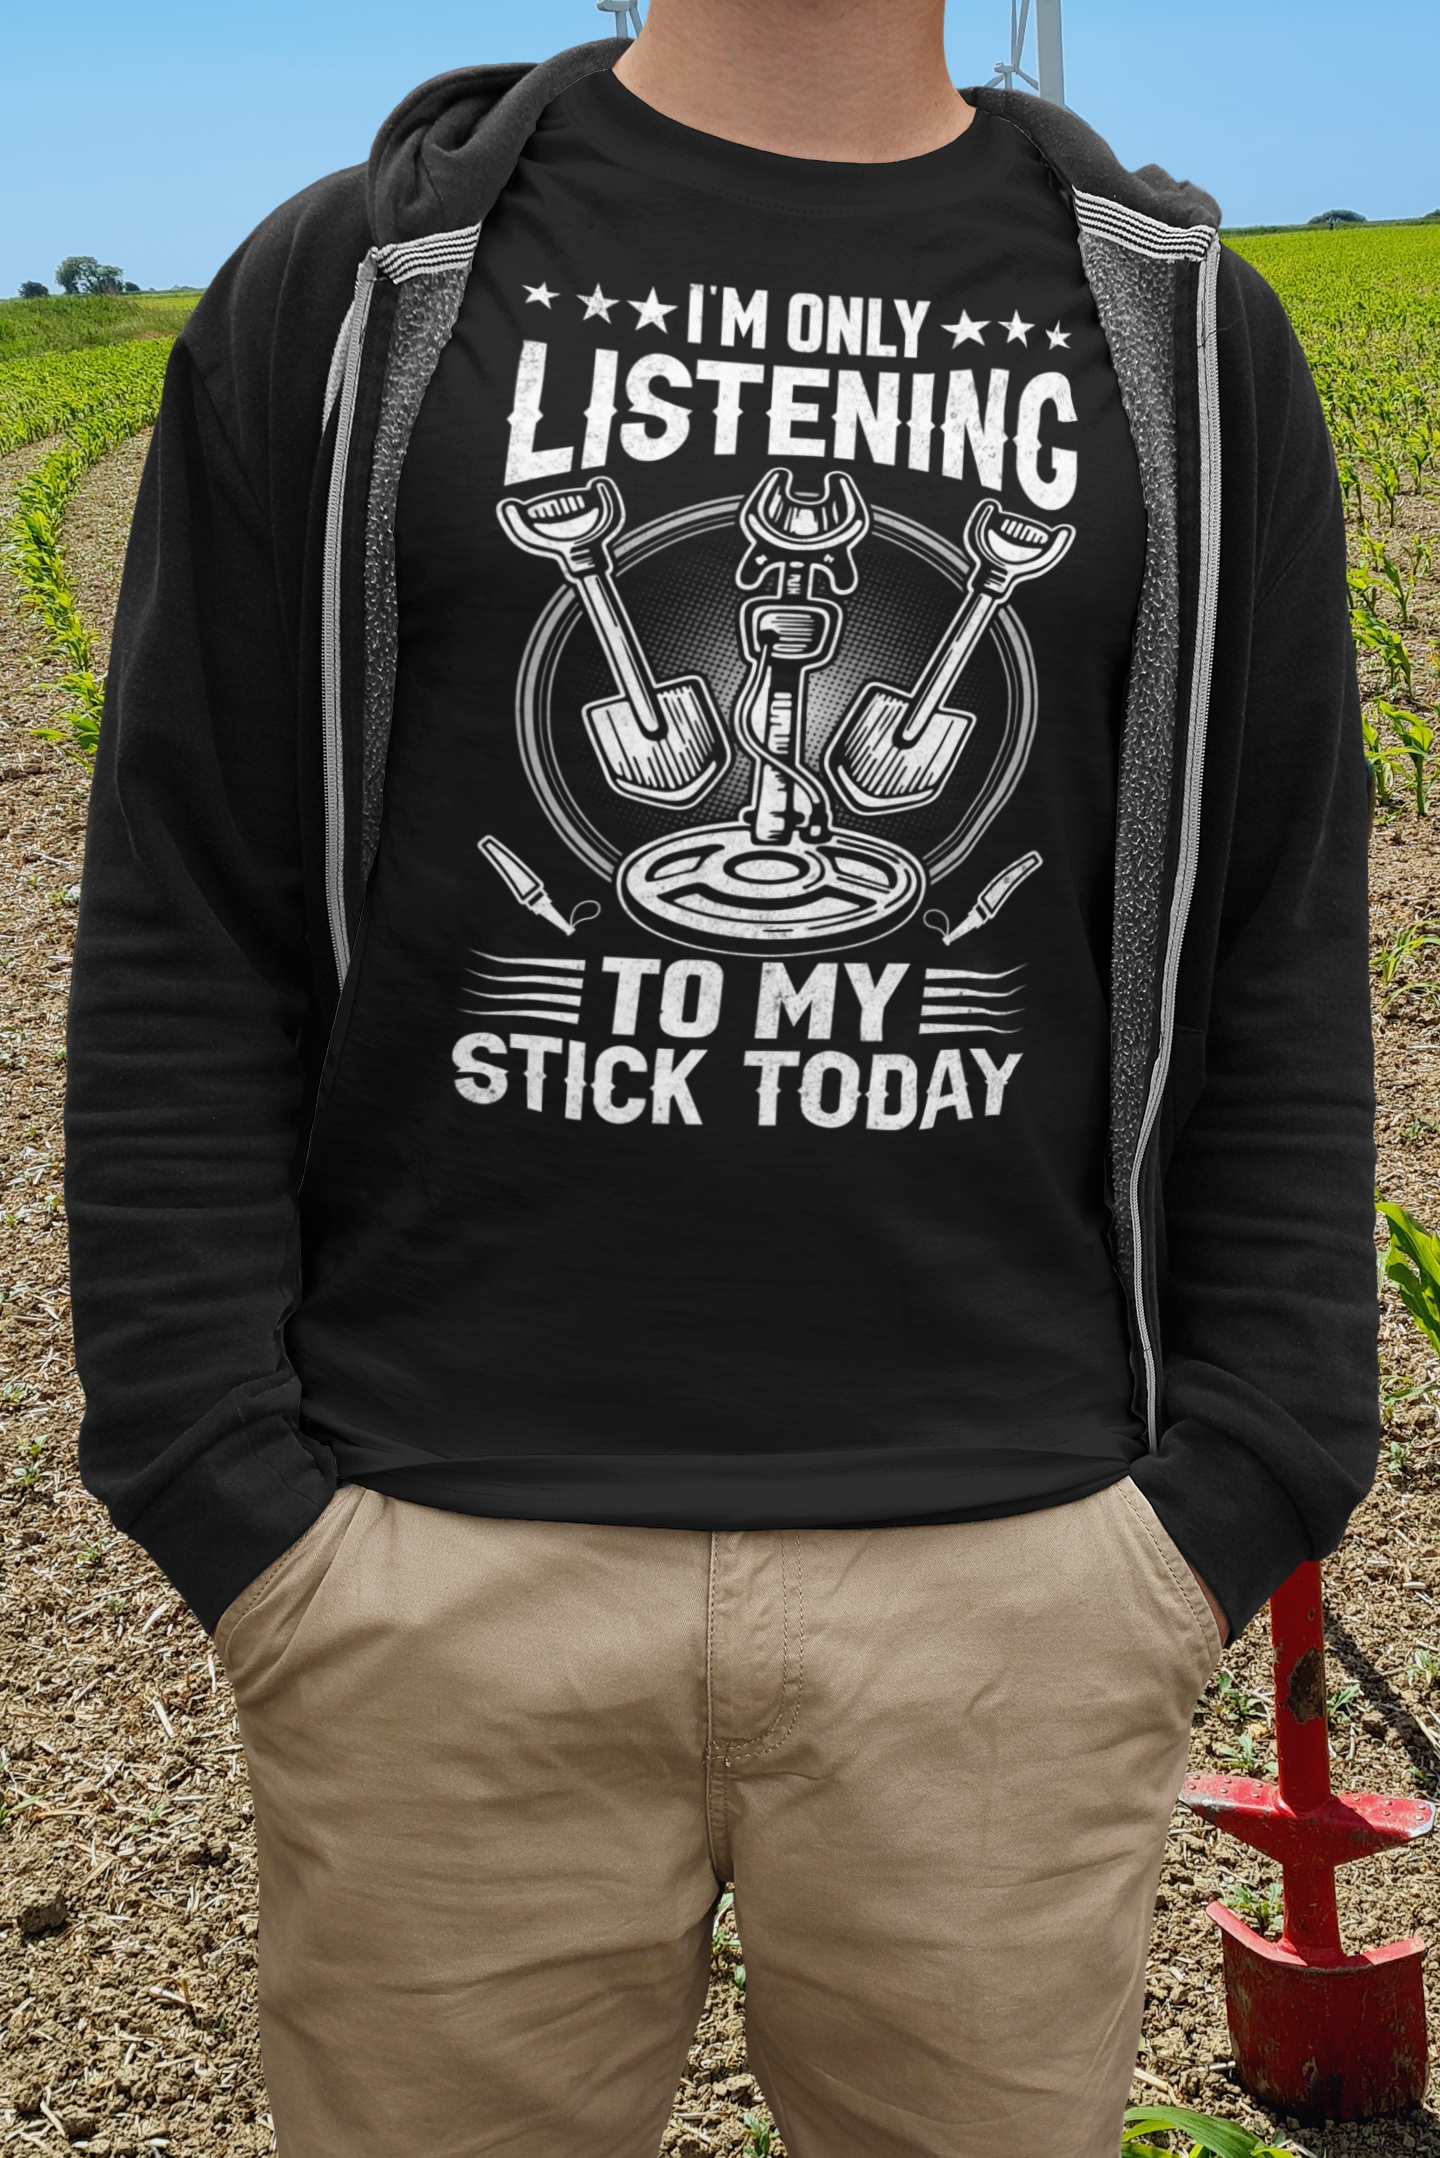 I'm only listening to my stick today